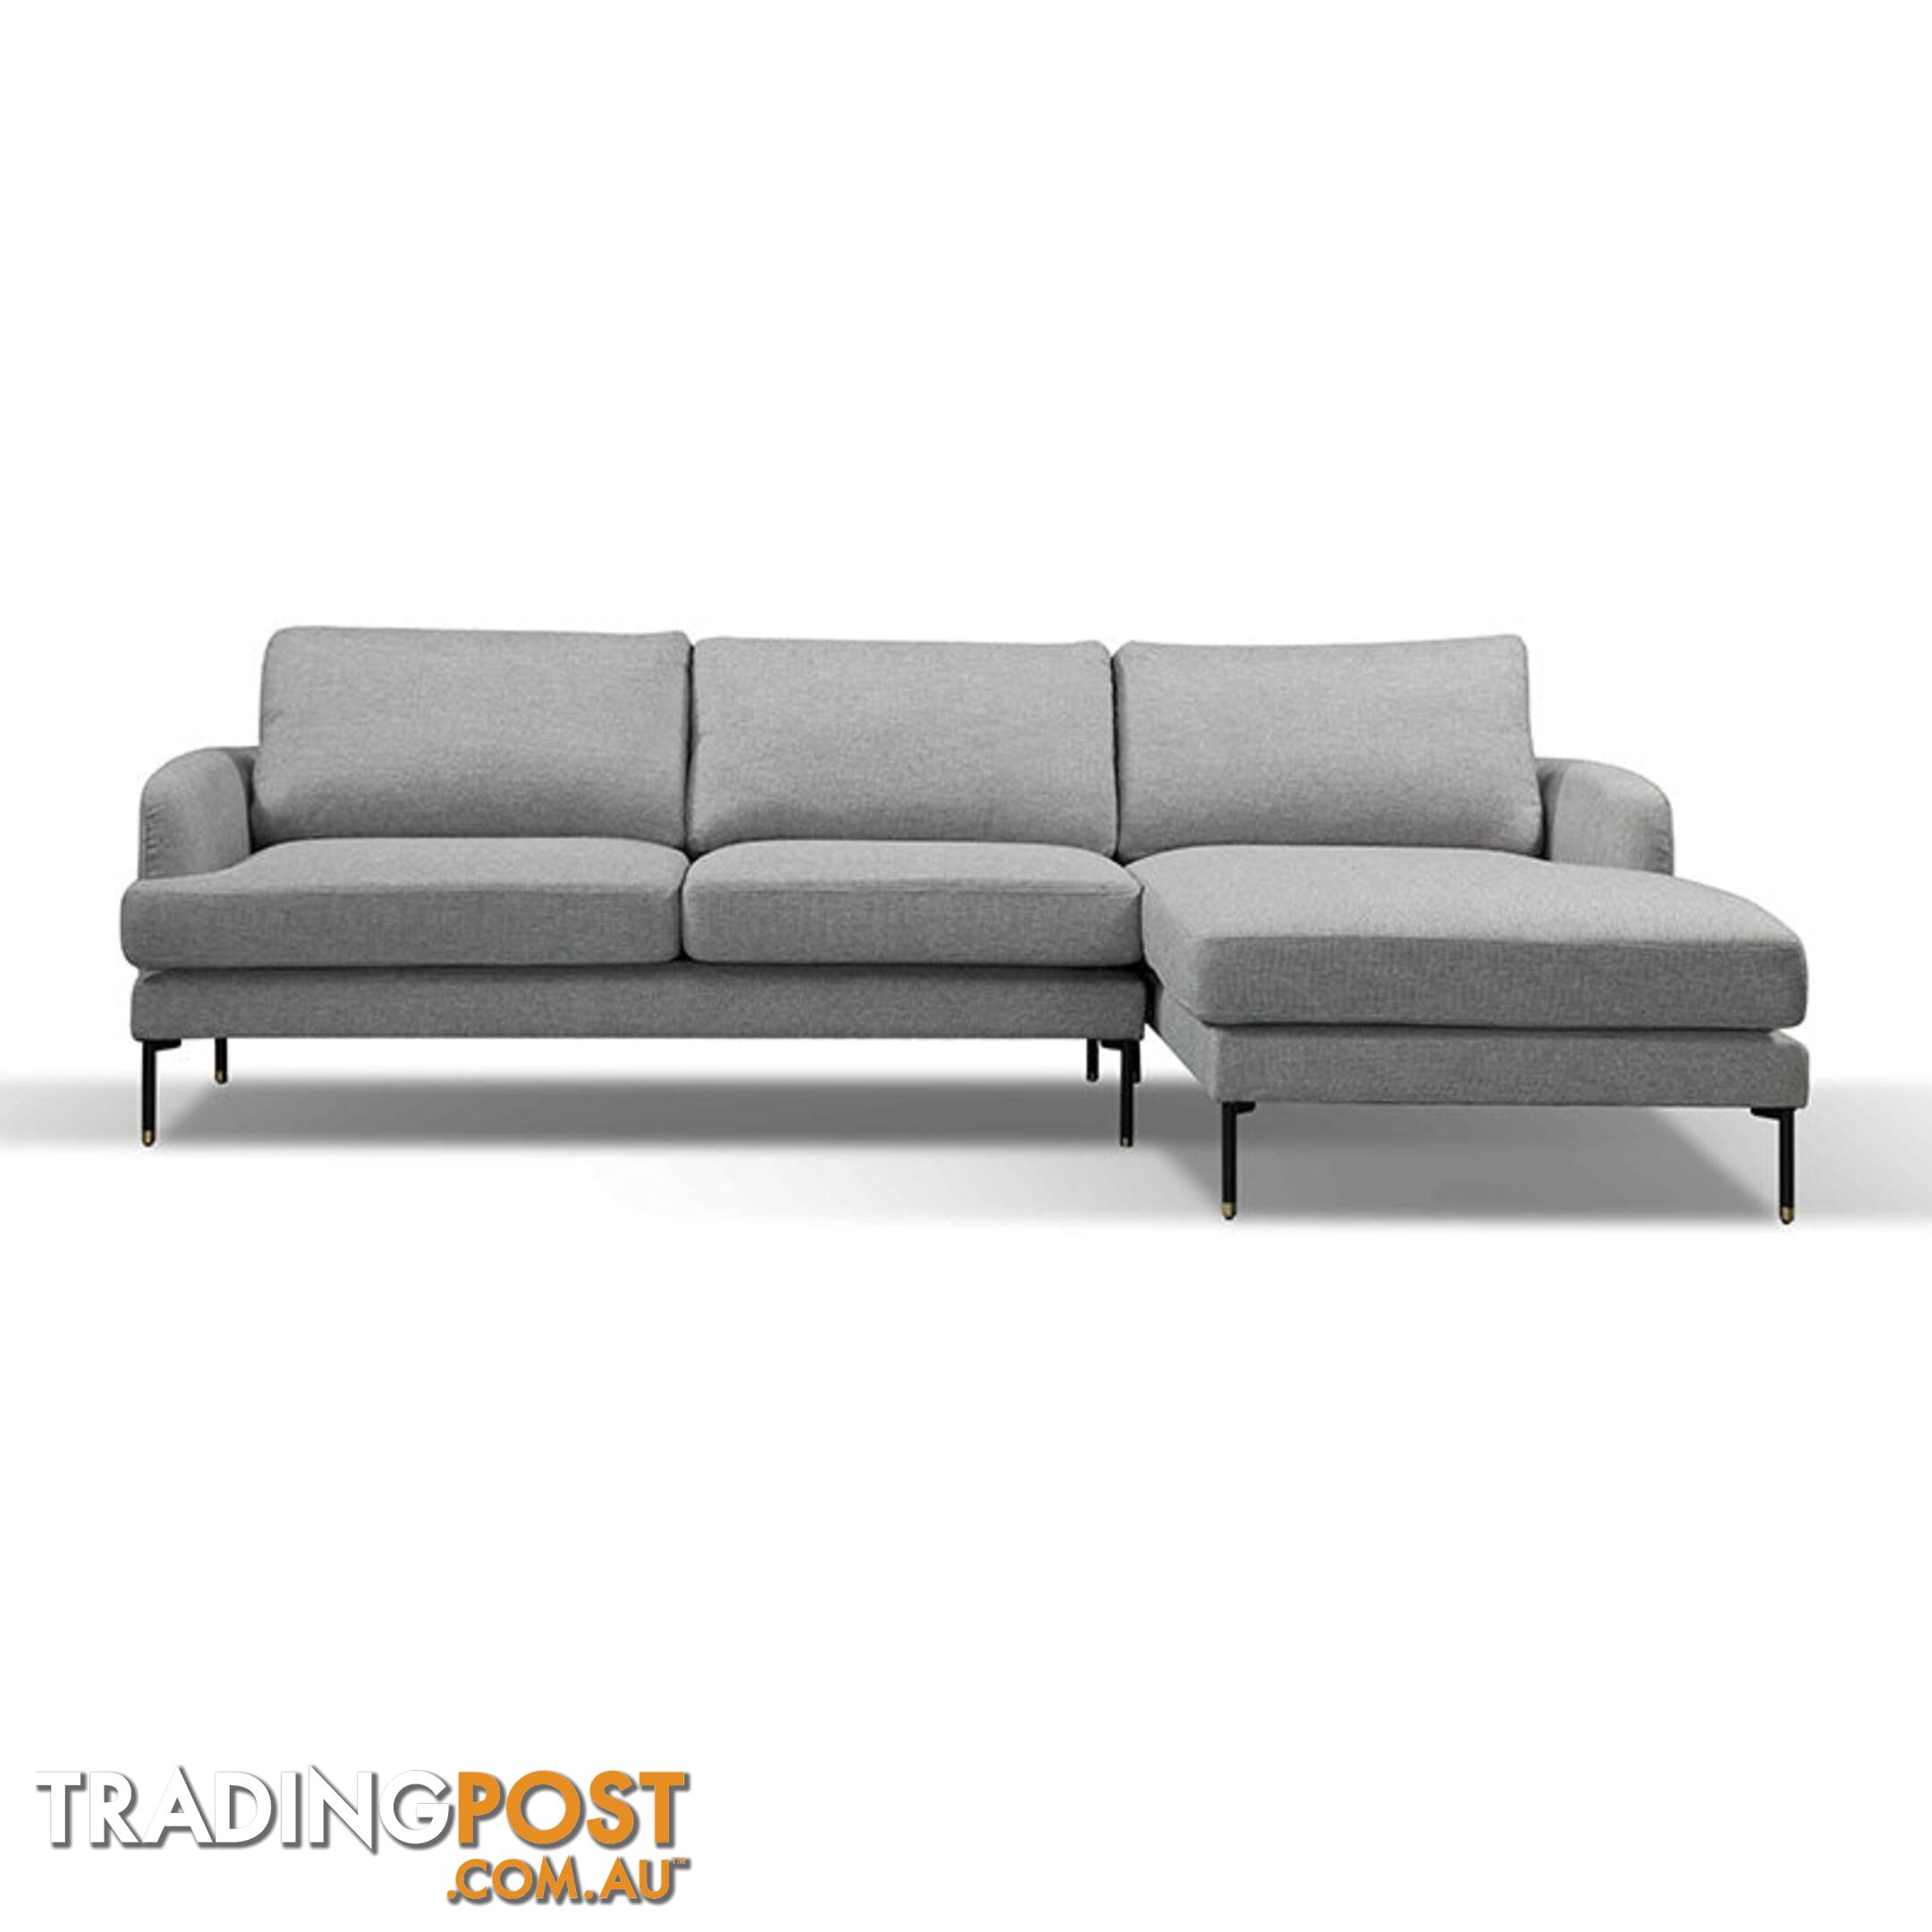 TIANA 3 Seater Sofa With Right Chaise - Grey - HD-2188-R - 9334719004587